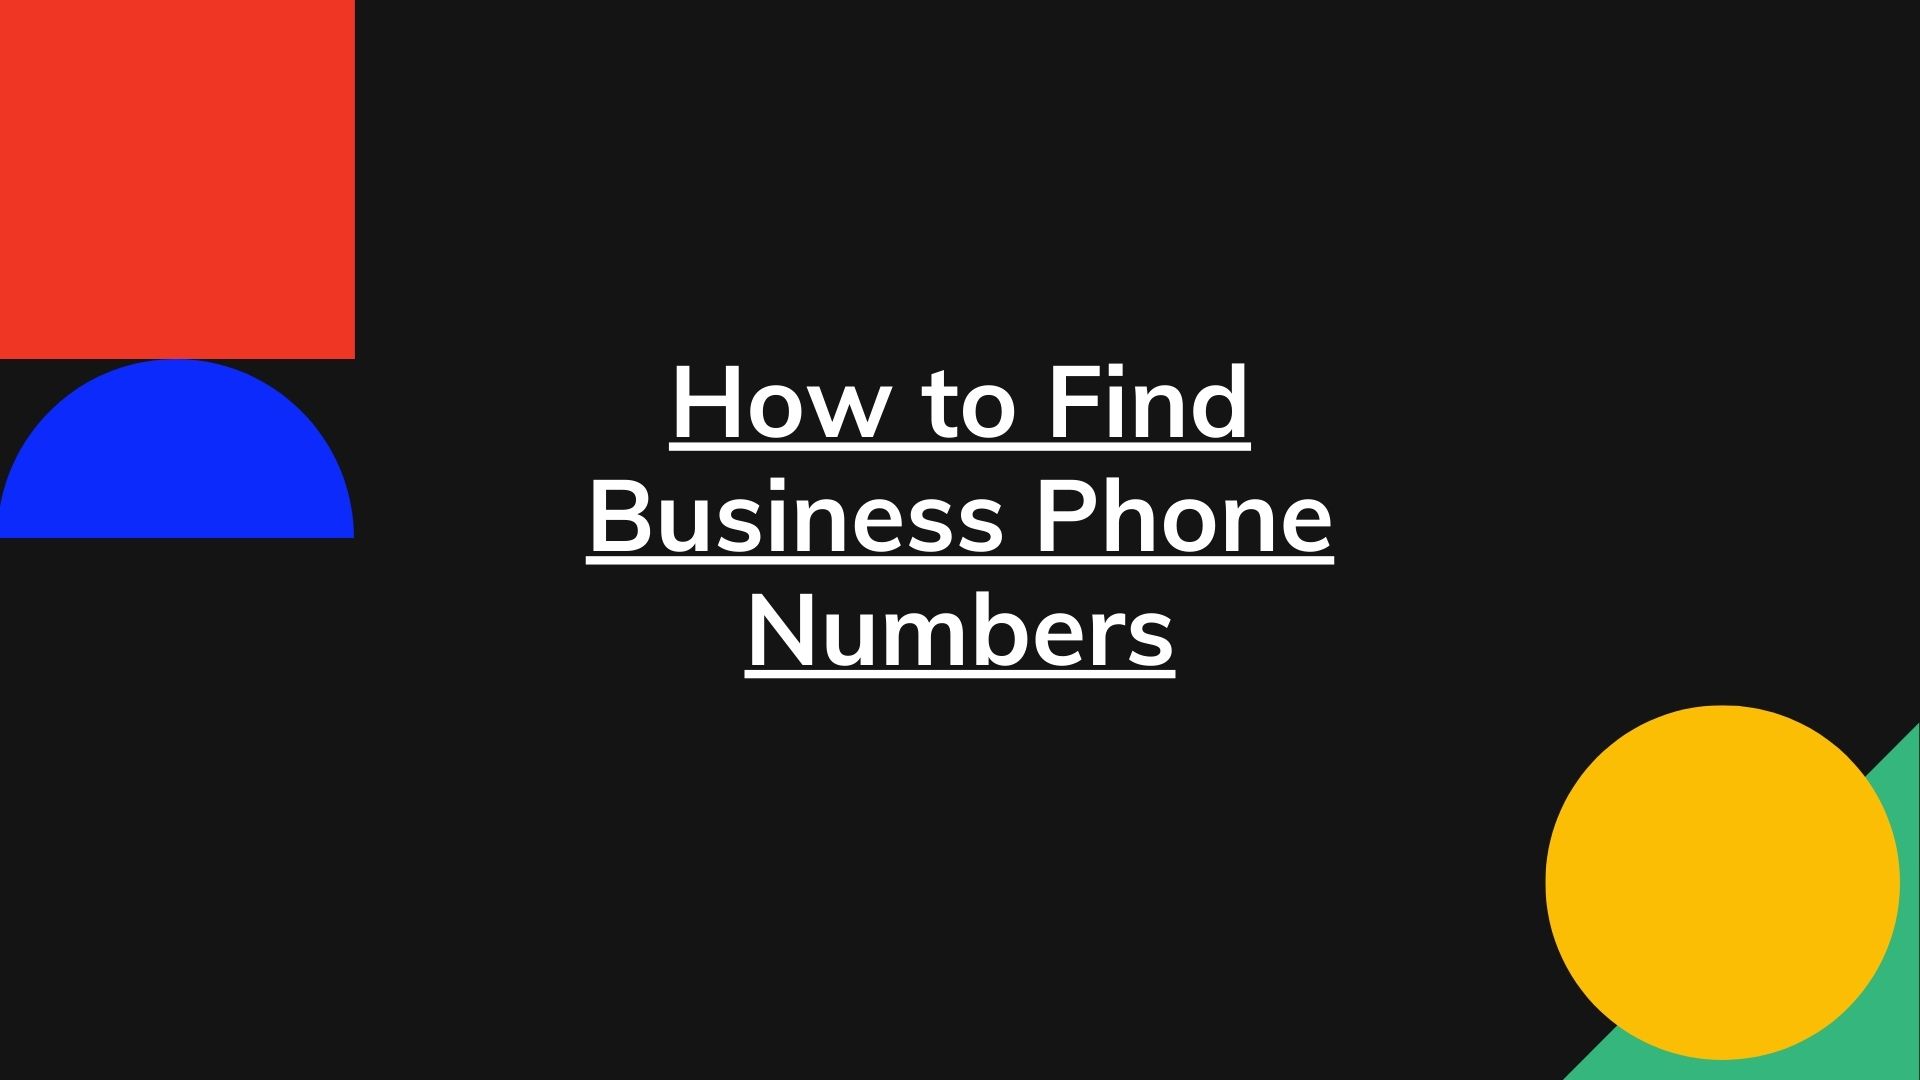 How to Find Business Phone Numbers – The Complete Guide